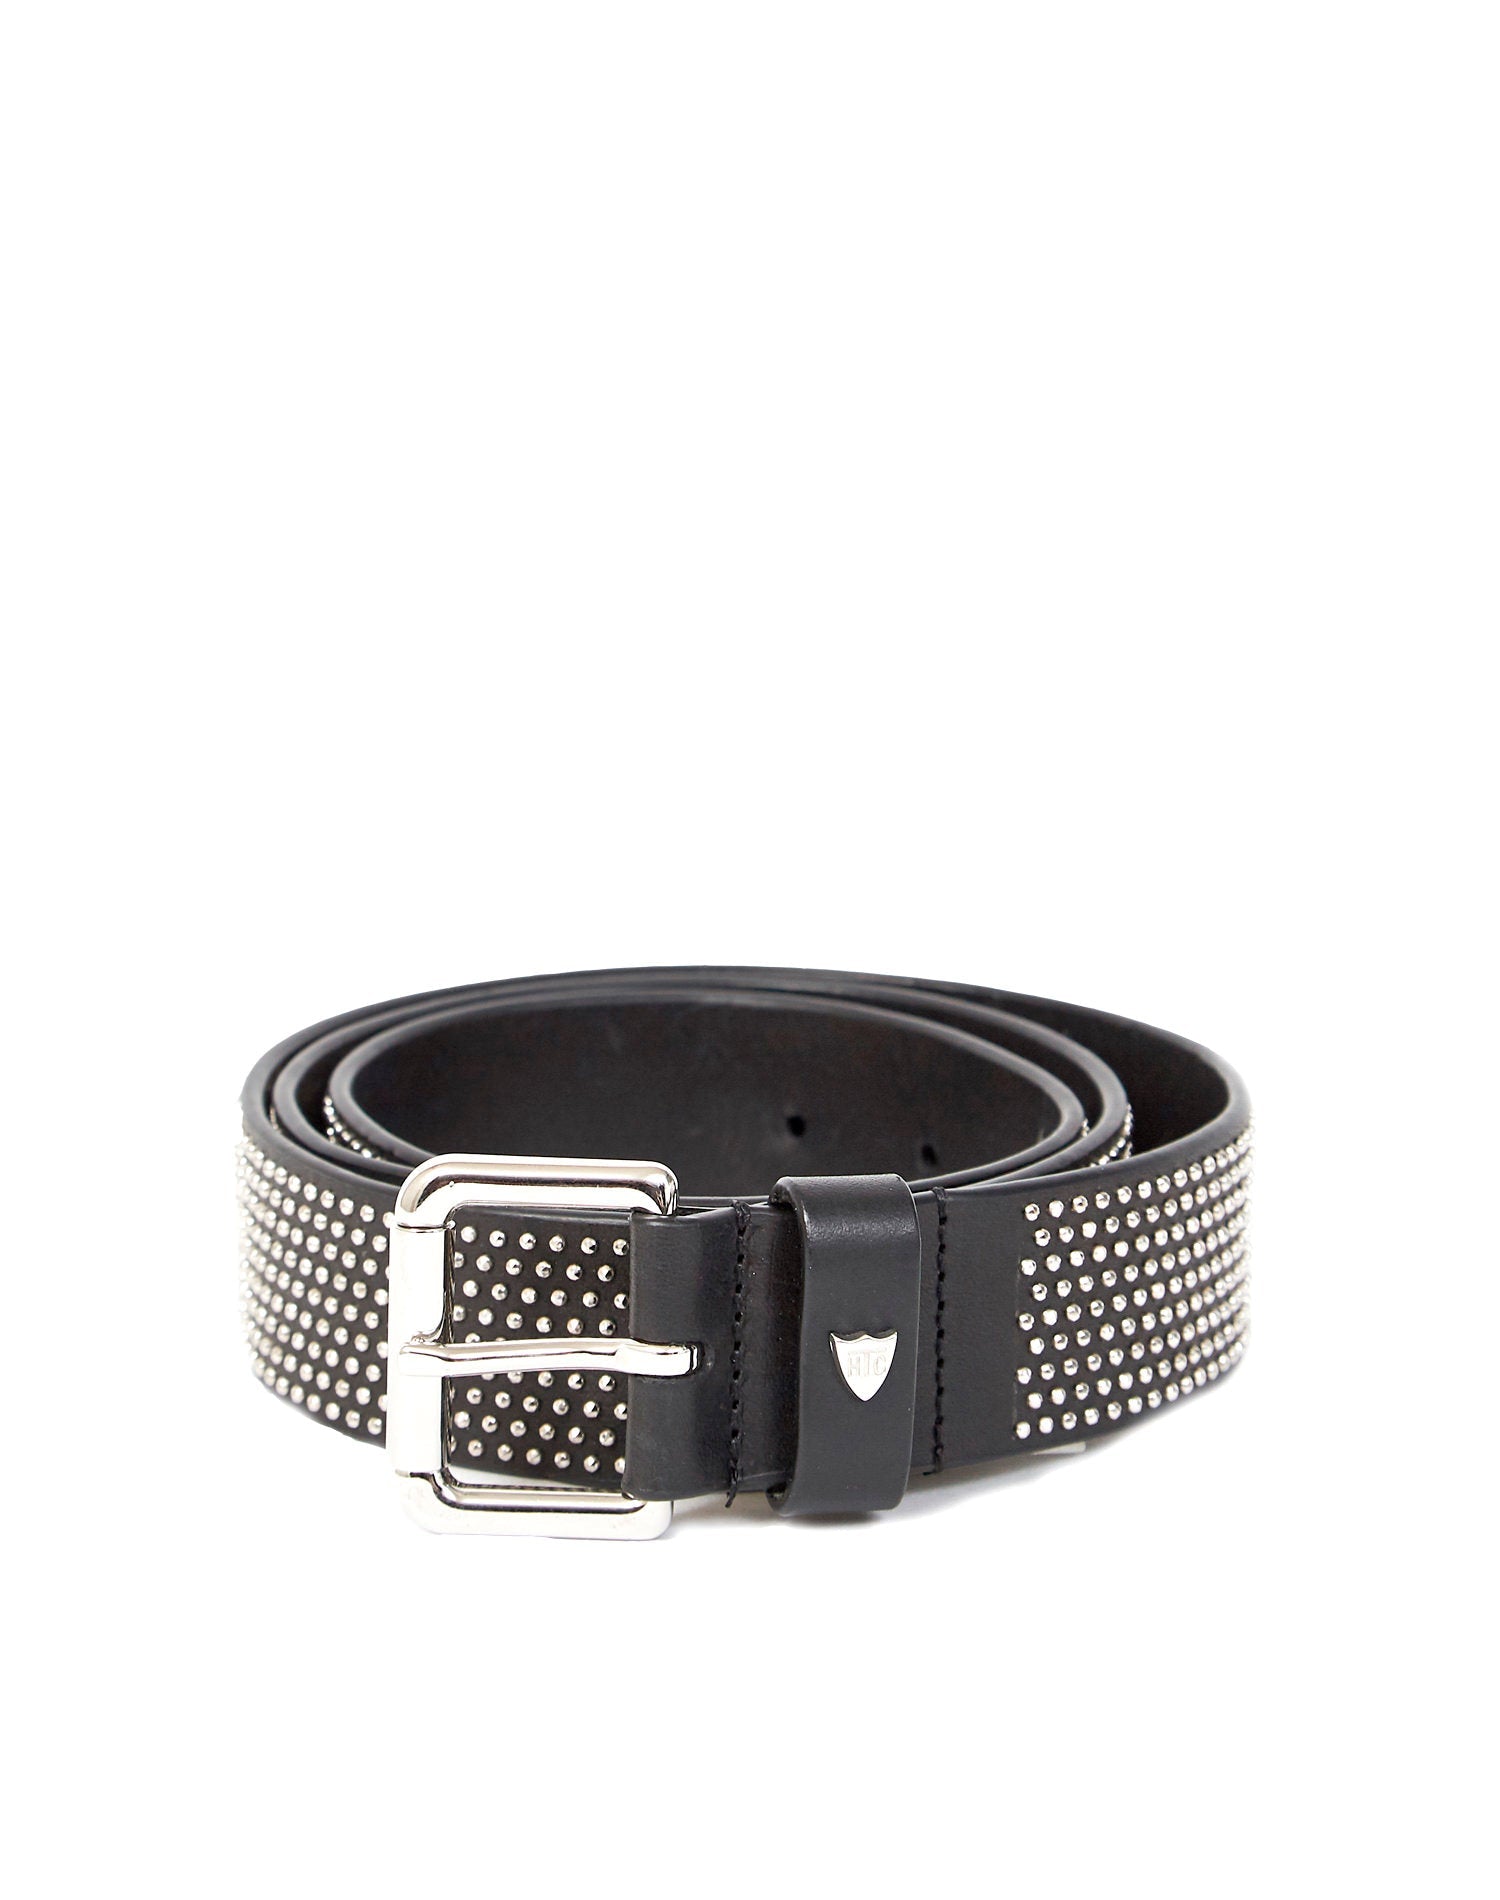 SOPHIA BELT Black leather belt with microstuds, buckle and belt loop in shiny metal. Height: 3.5 cm. Made in Italy. HTC LOS ANGELES